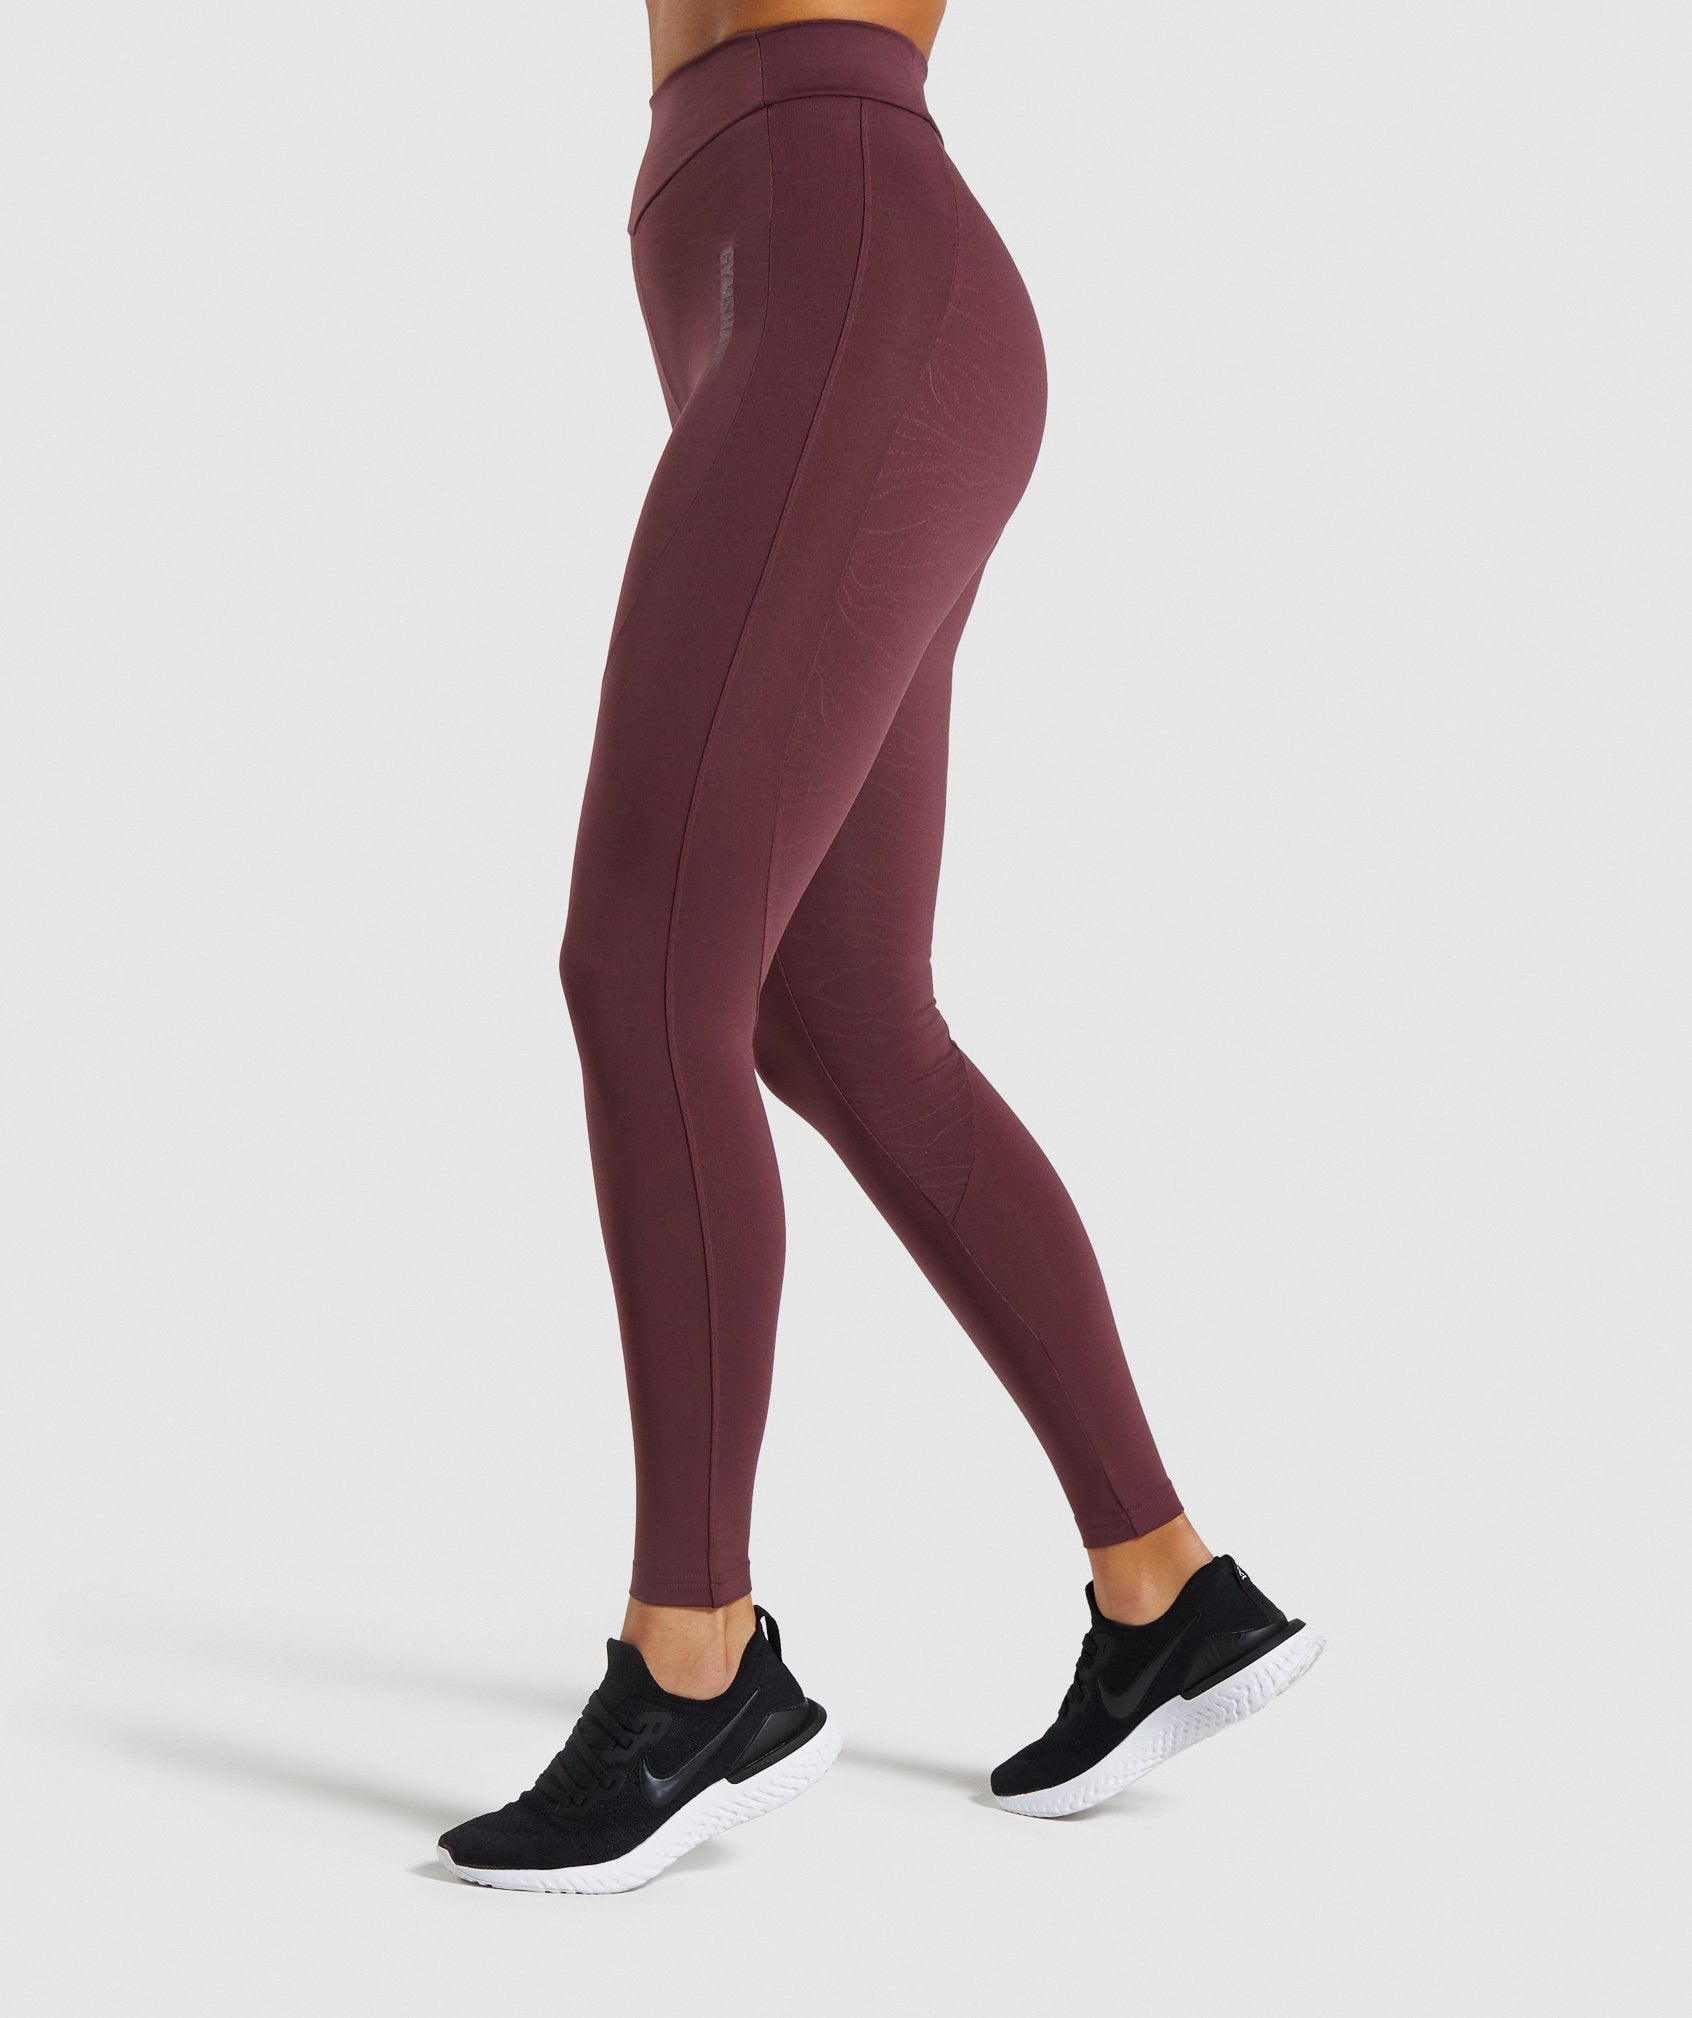 Lustre Leggings in Berry Red - view 3